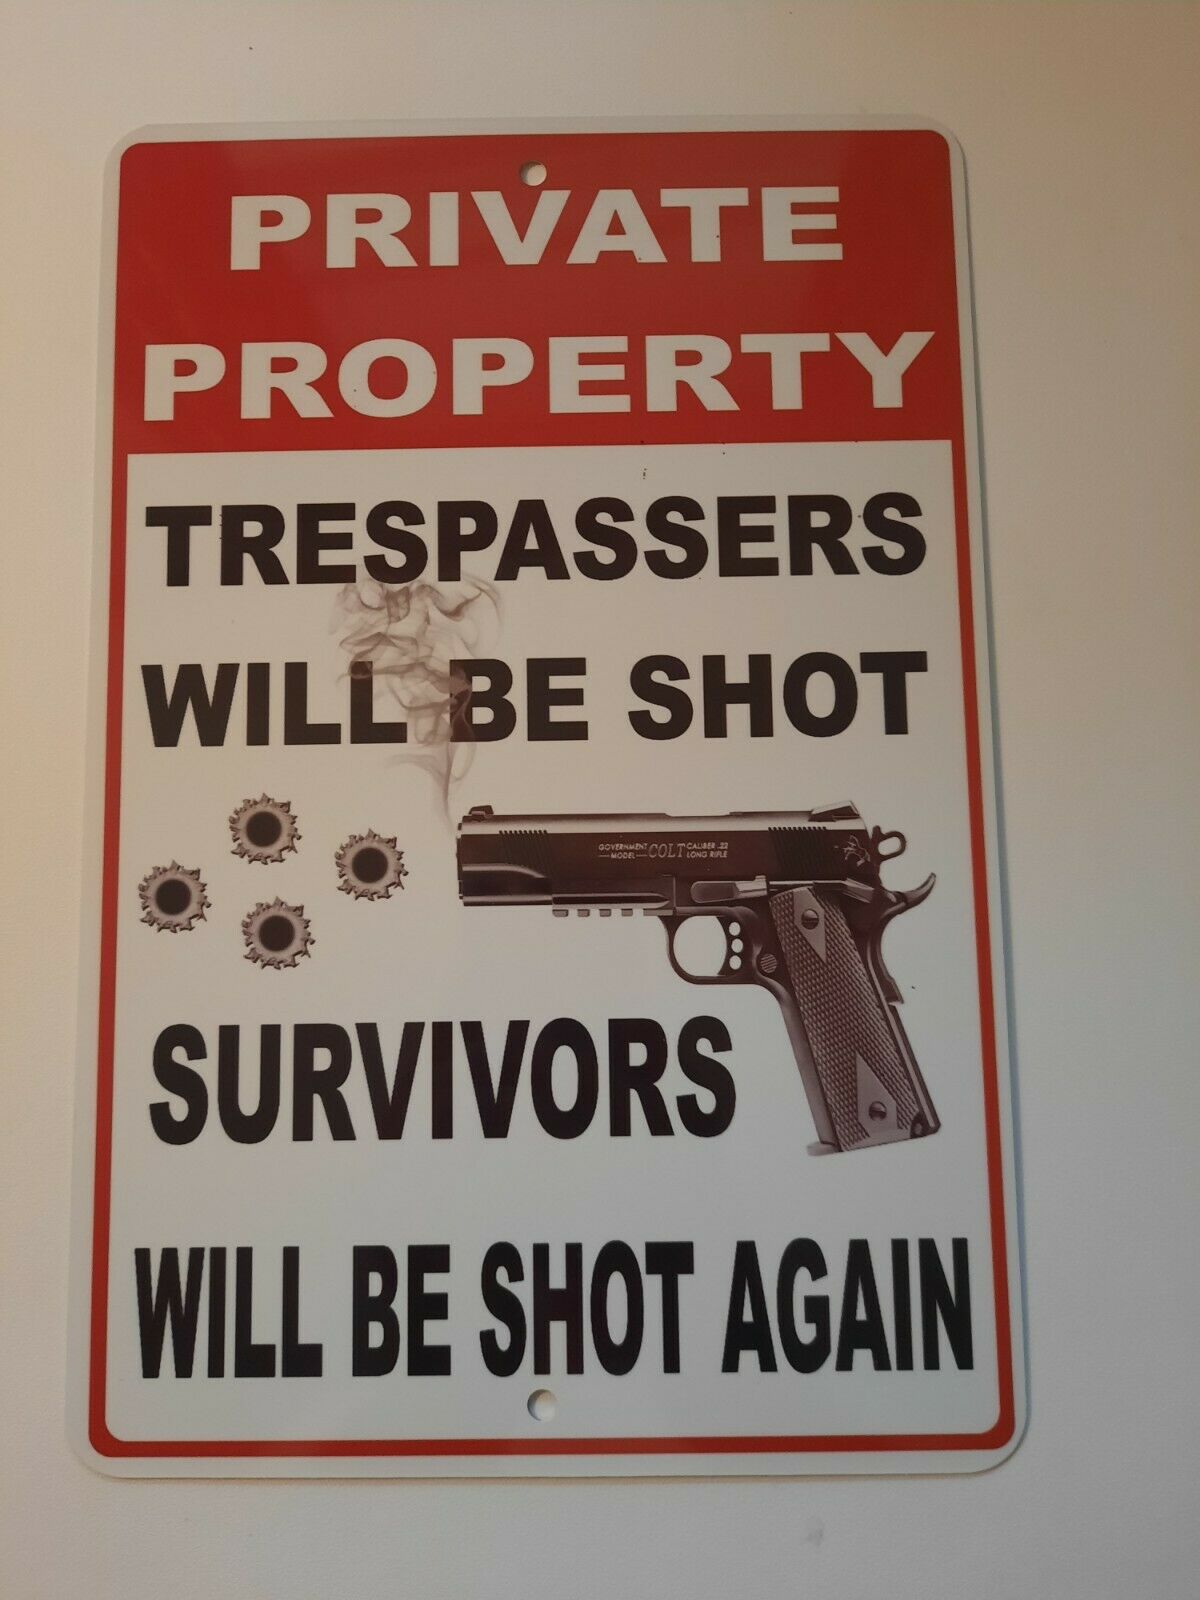 Private Property Trespassers Will be Shot 8x12 Metal Wall Warning Sign